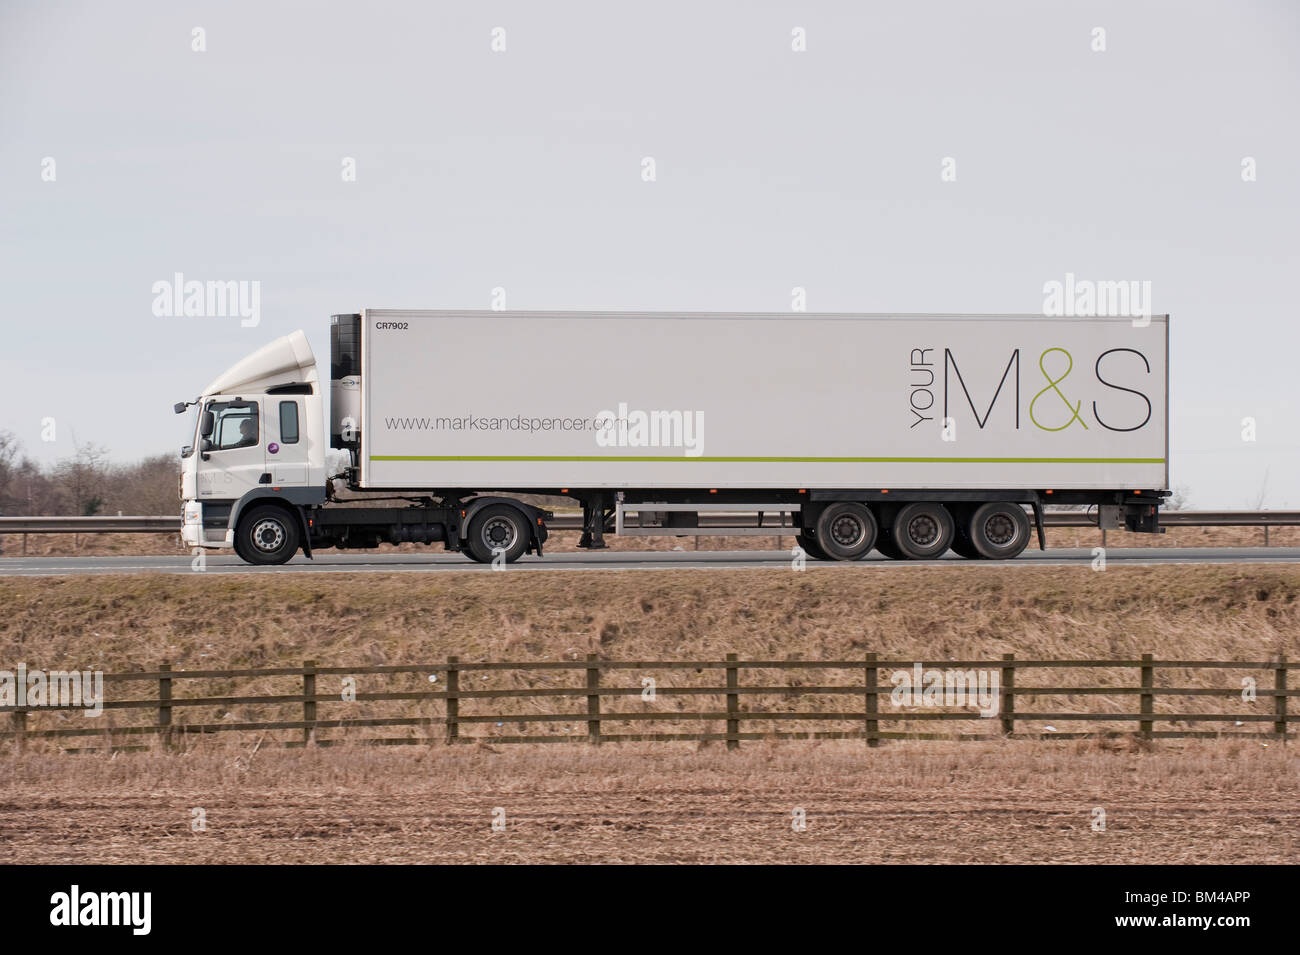 A lorry transporting goods for Marks & Spencer, travelling along a motorway. Stock Photo